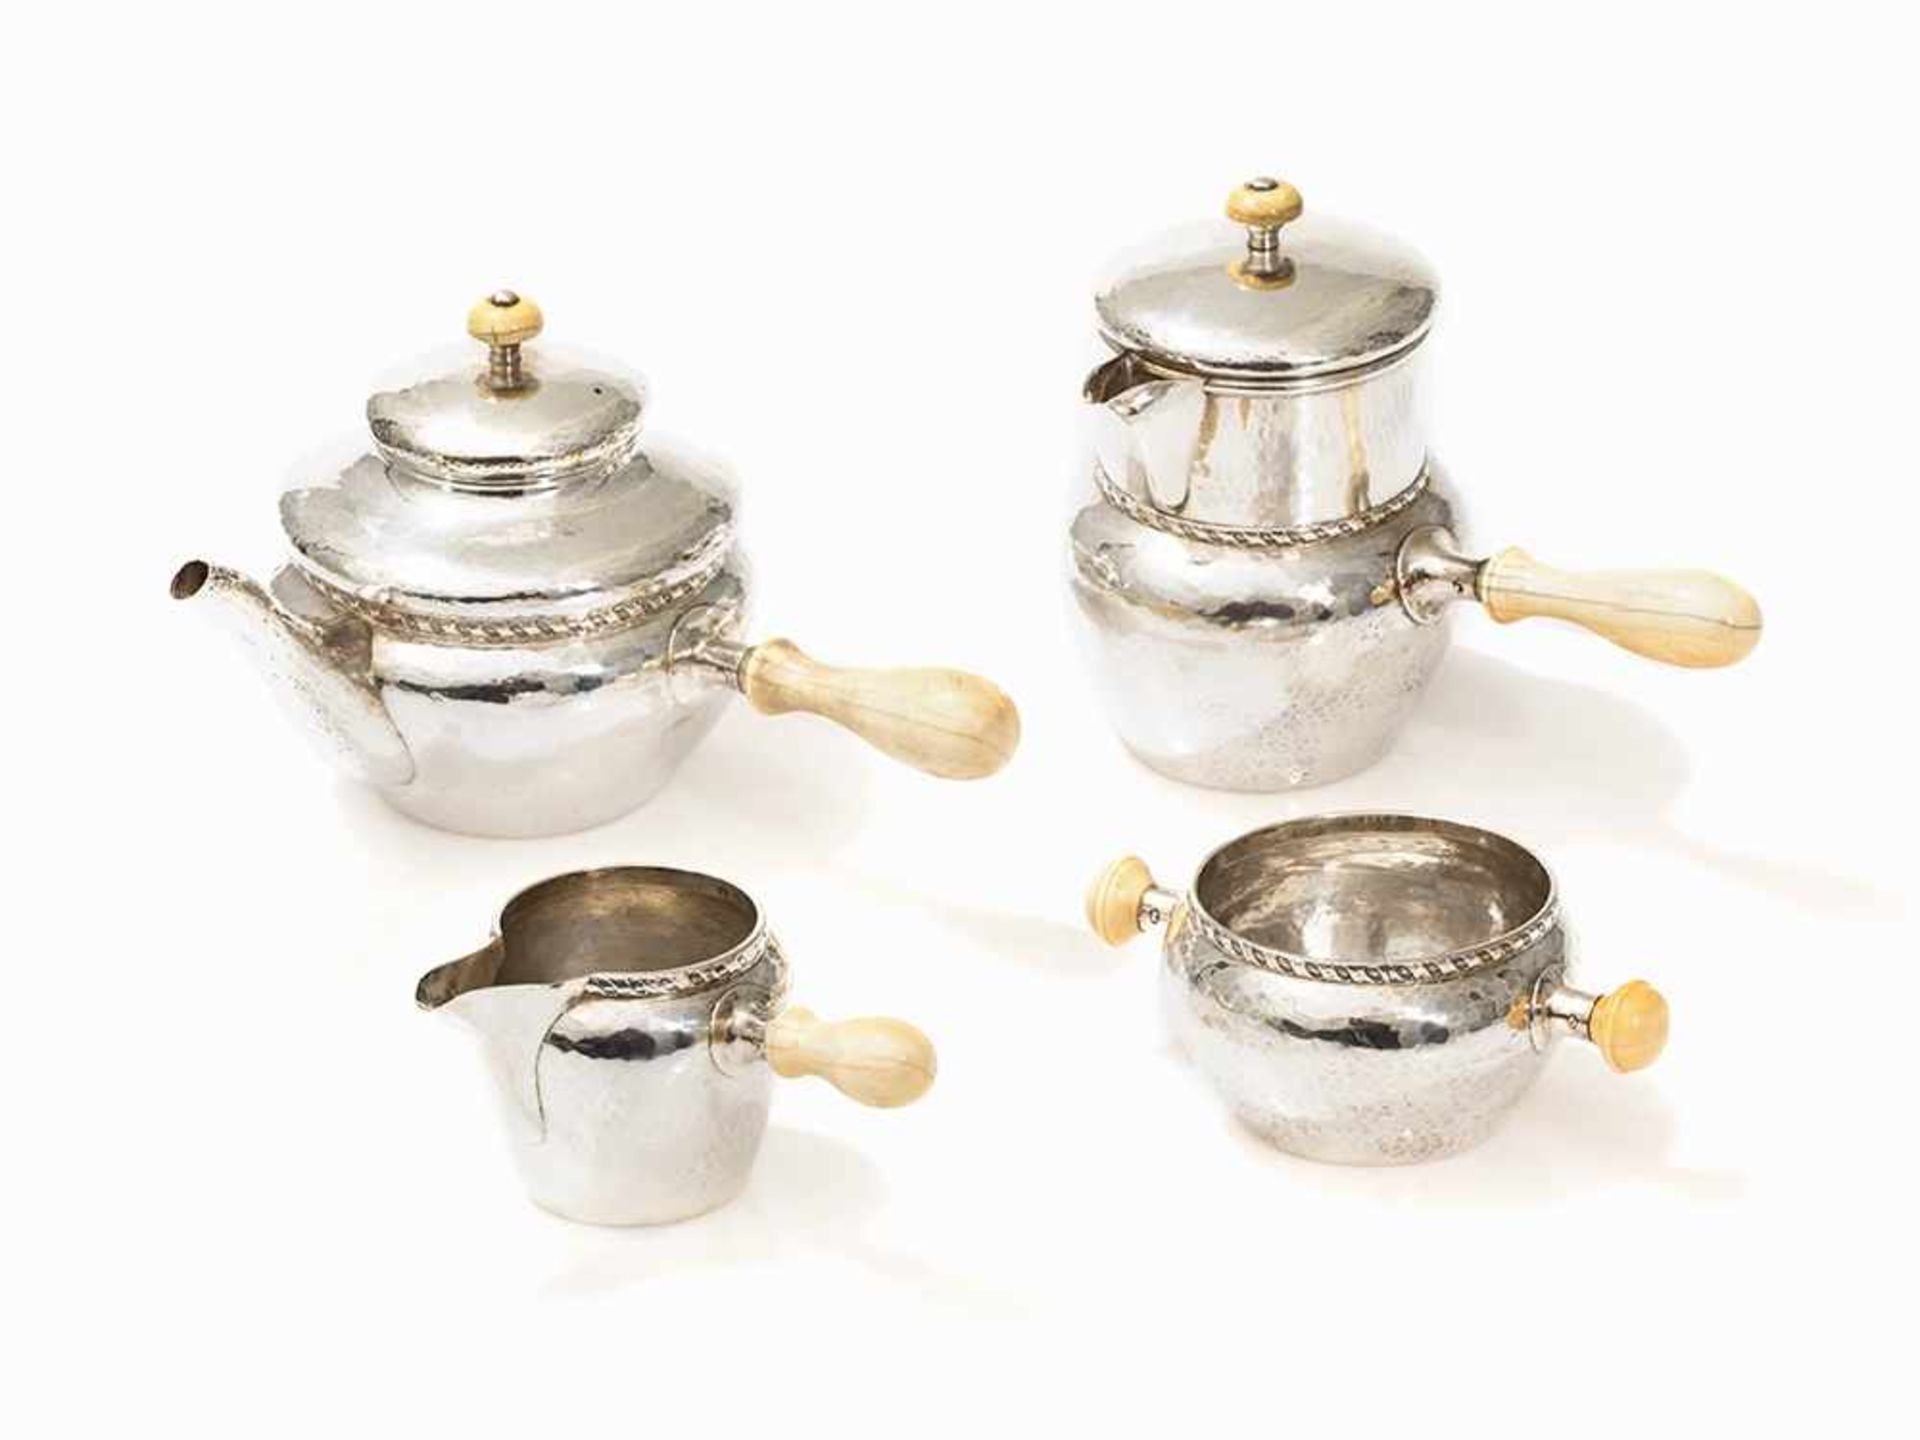 Albert E. Jones, 4-Piece Coffee and Tea Service, 1924/28 Cast, hammered and chased sterling